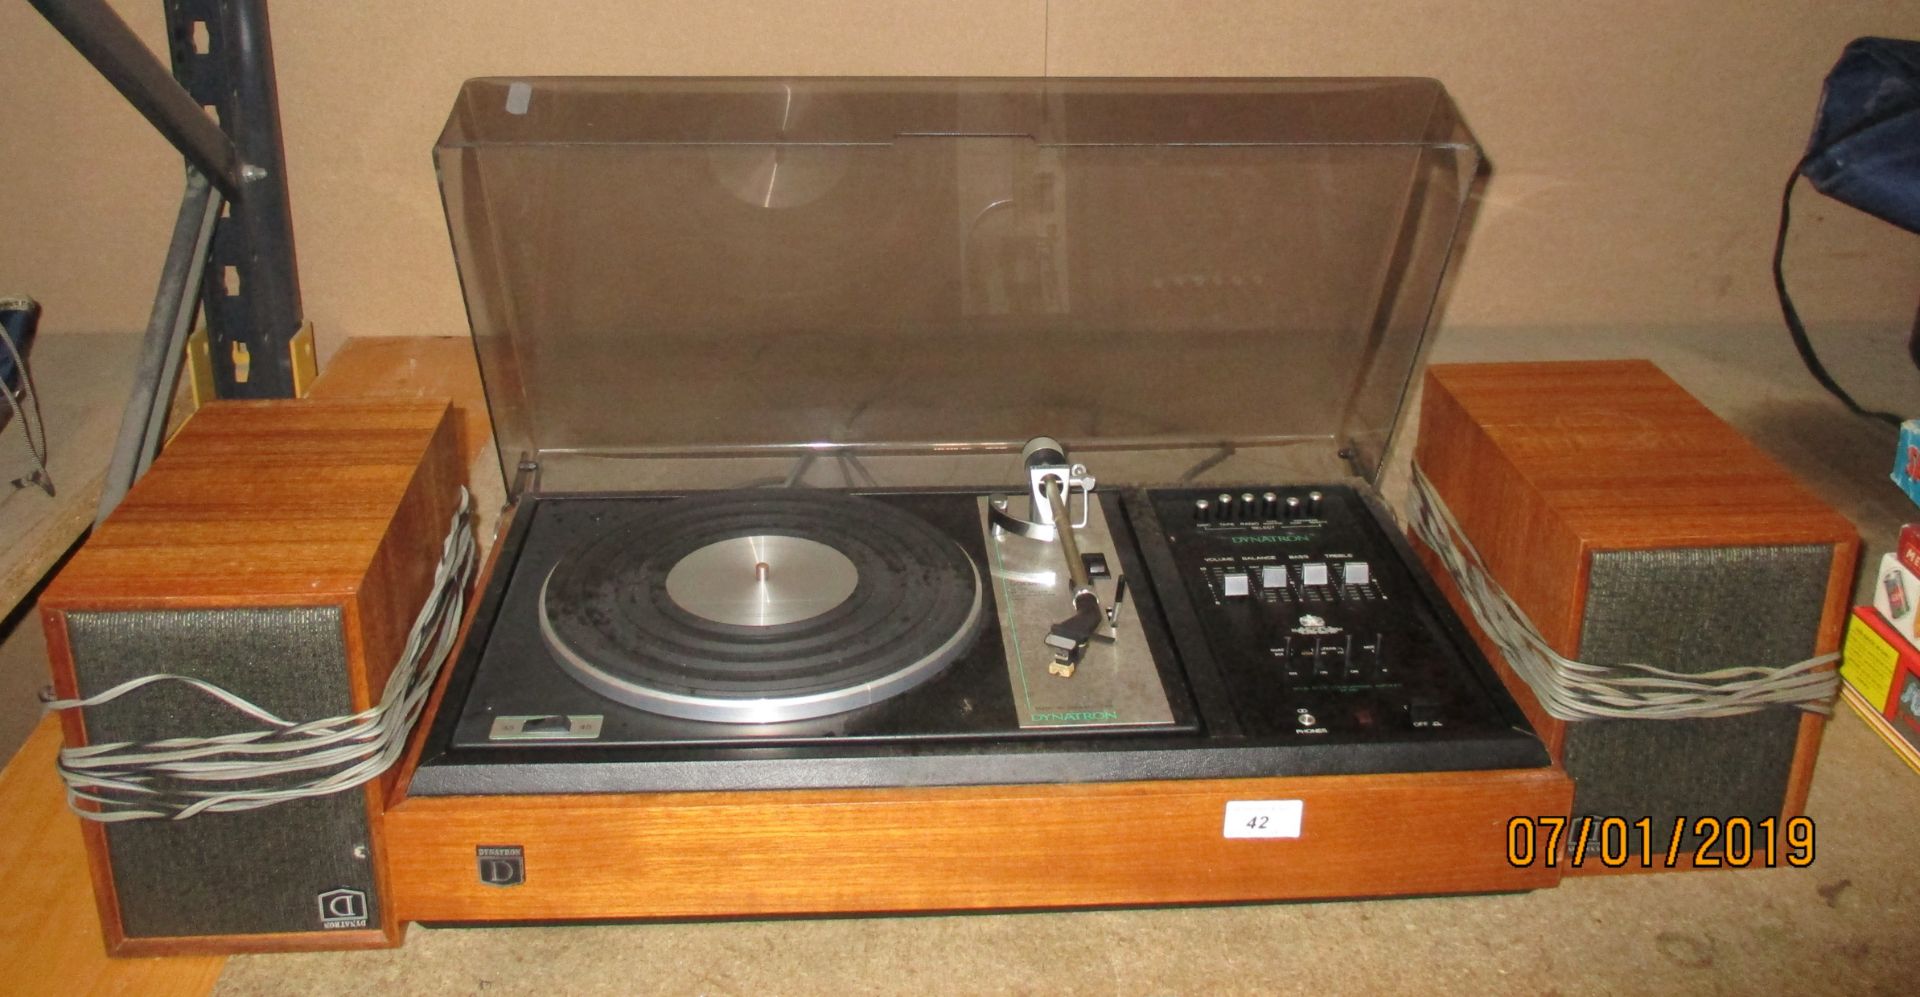 A Dynatron G102 Goldring turntable complete with a pair of Dynatron LS 1018 speakers